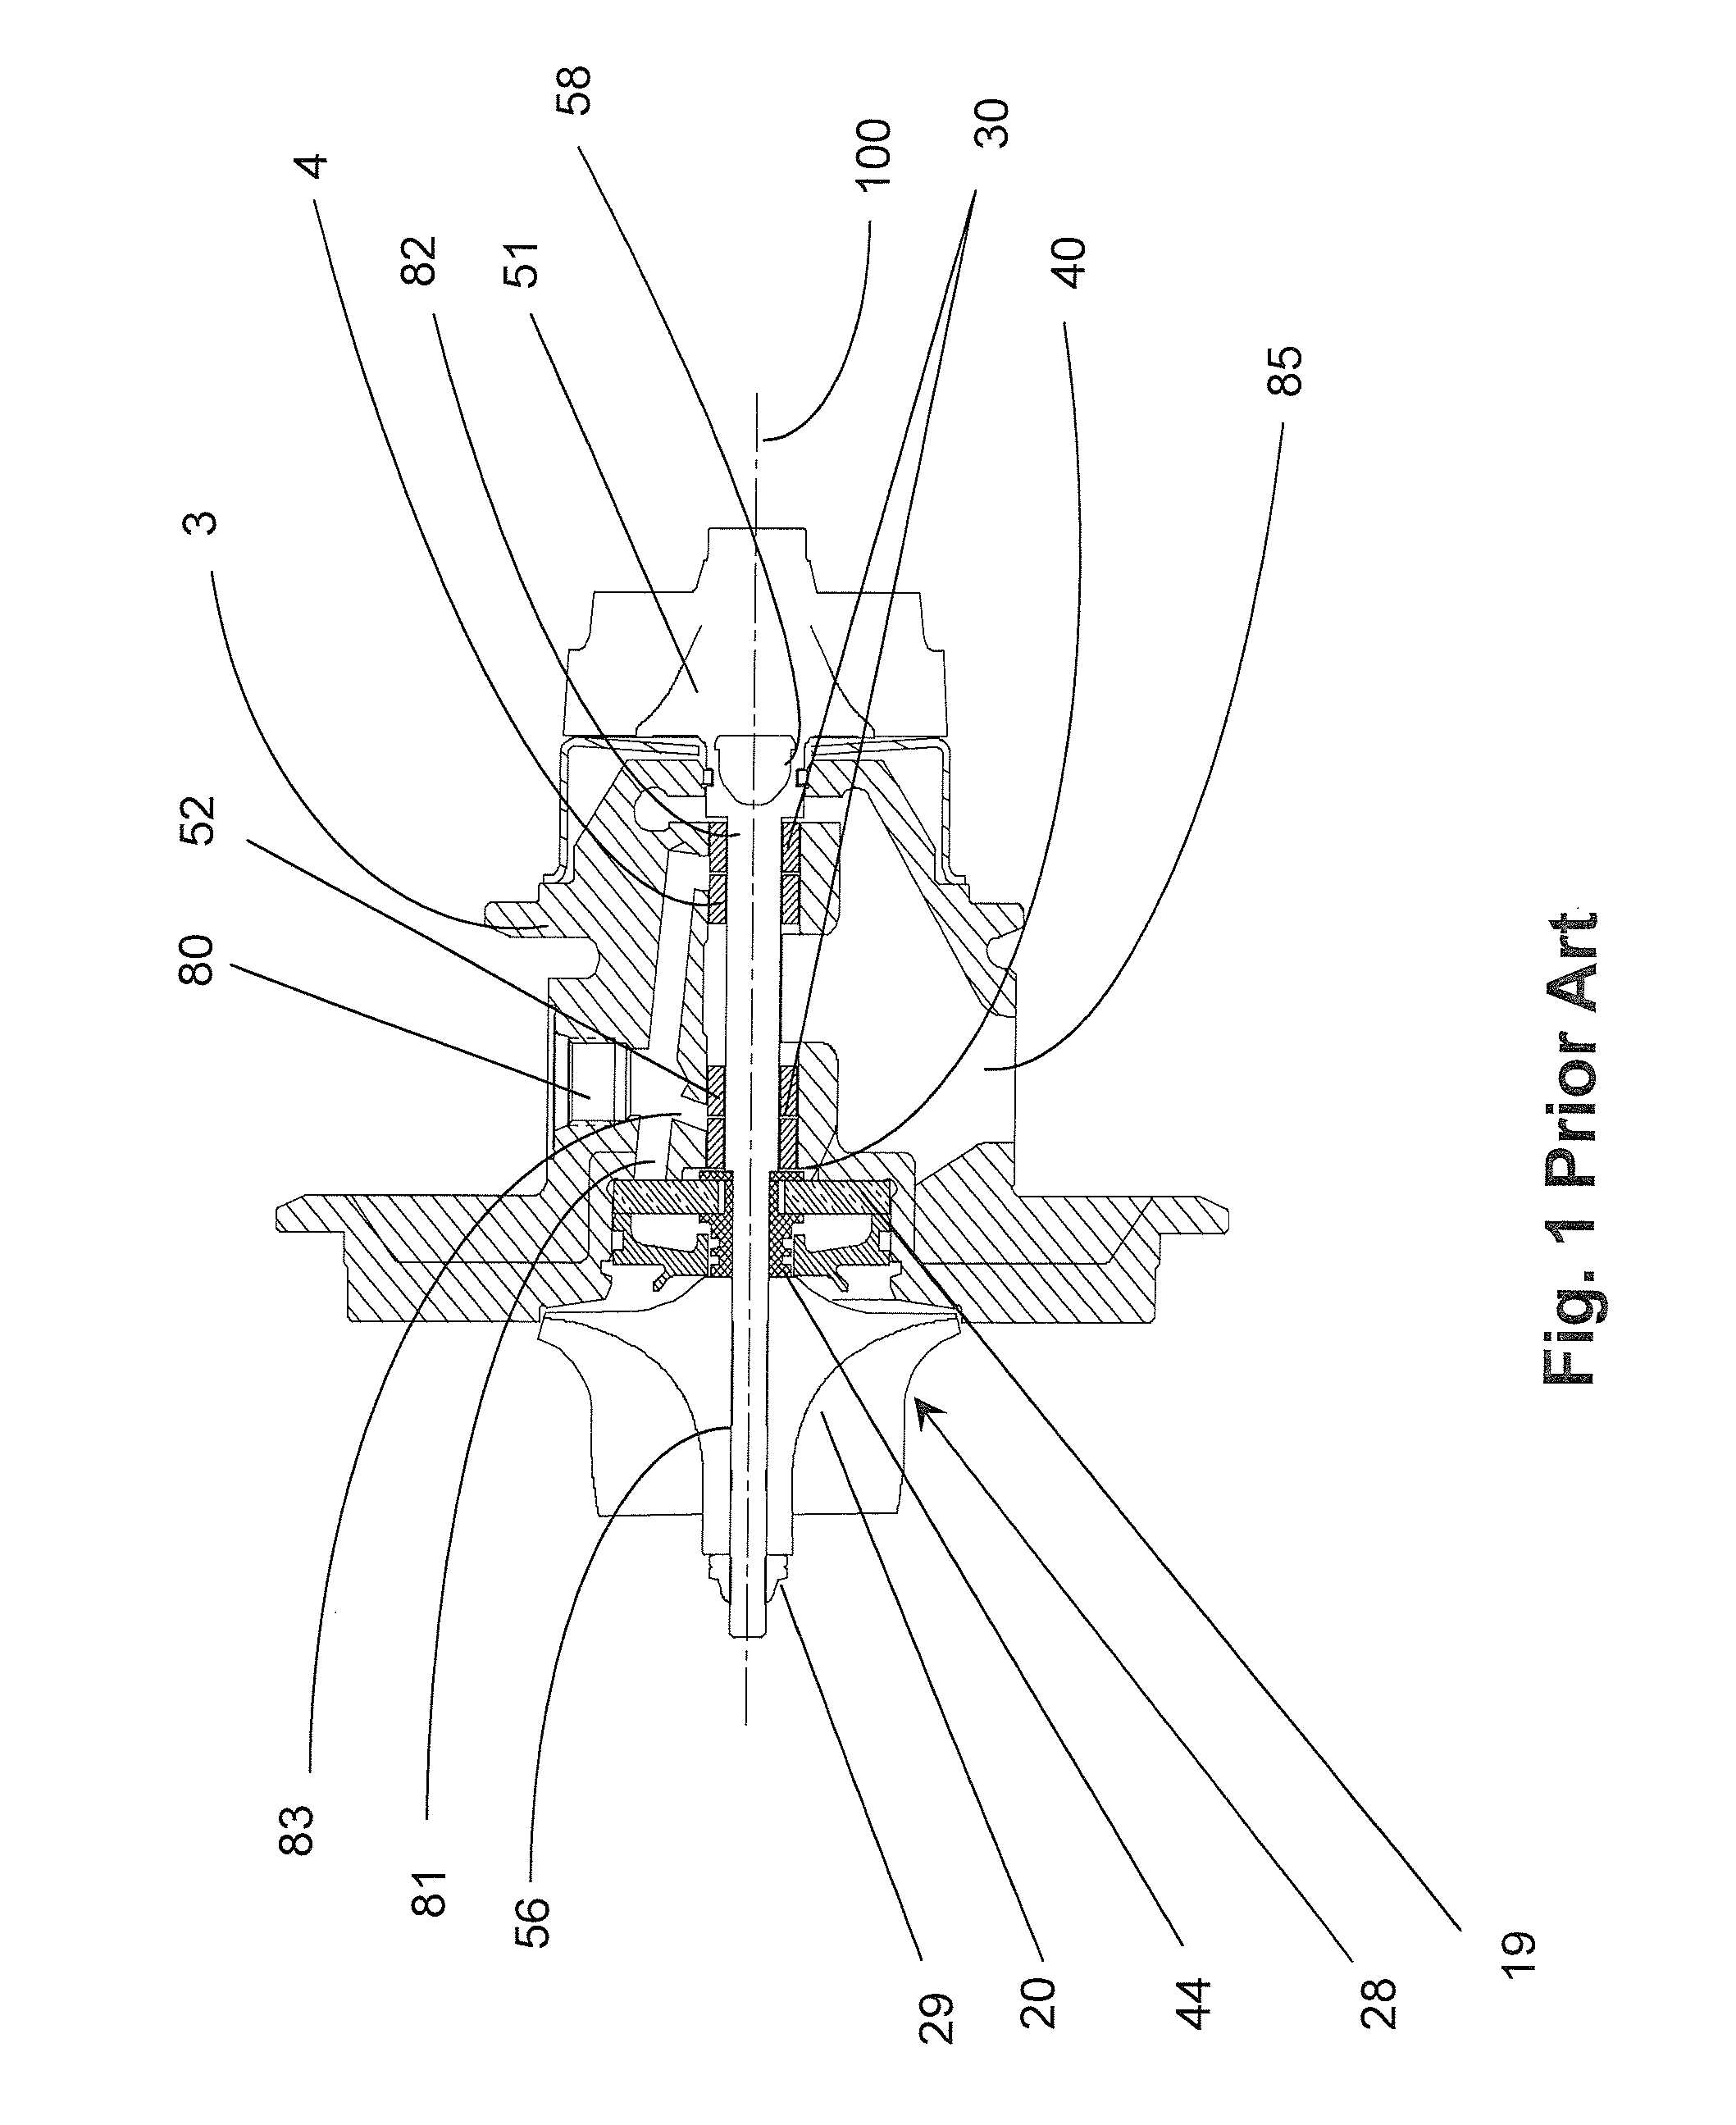 Insulating and damping sleeve for a rolling element bearing cartridge